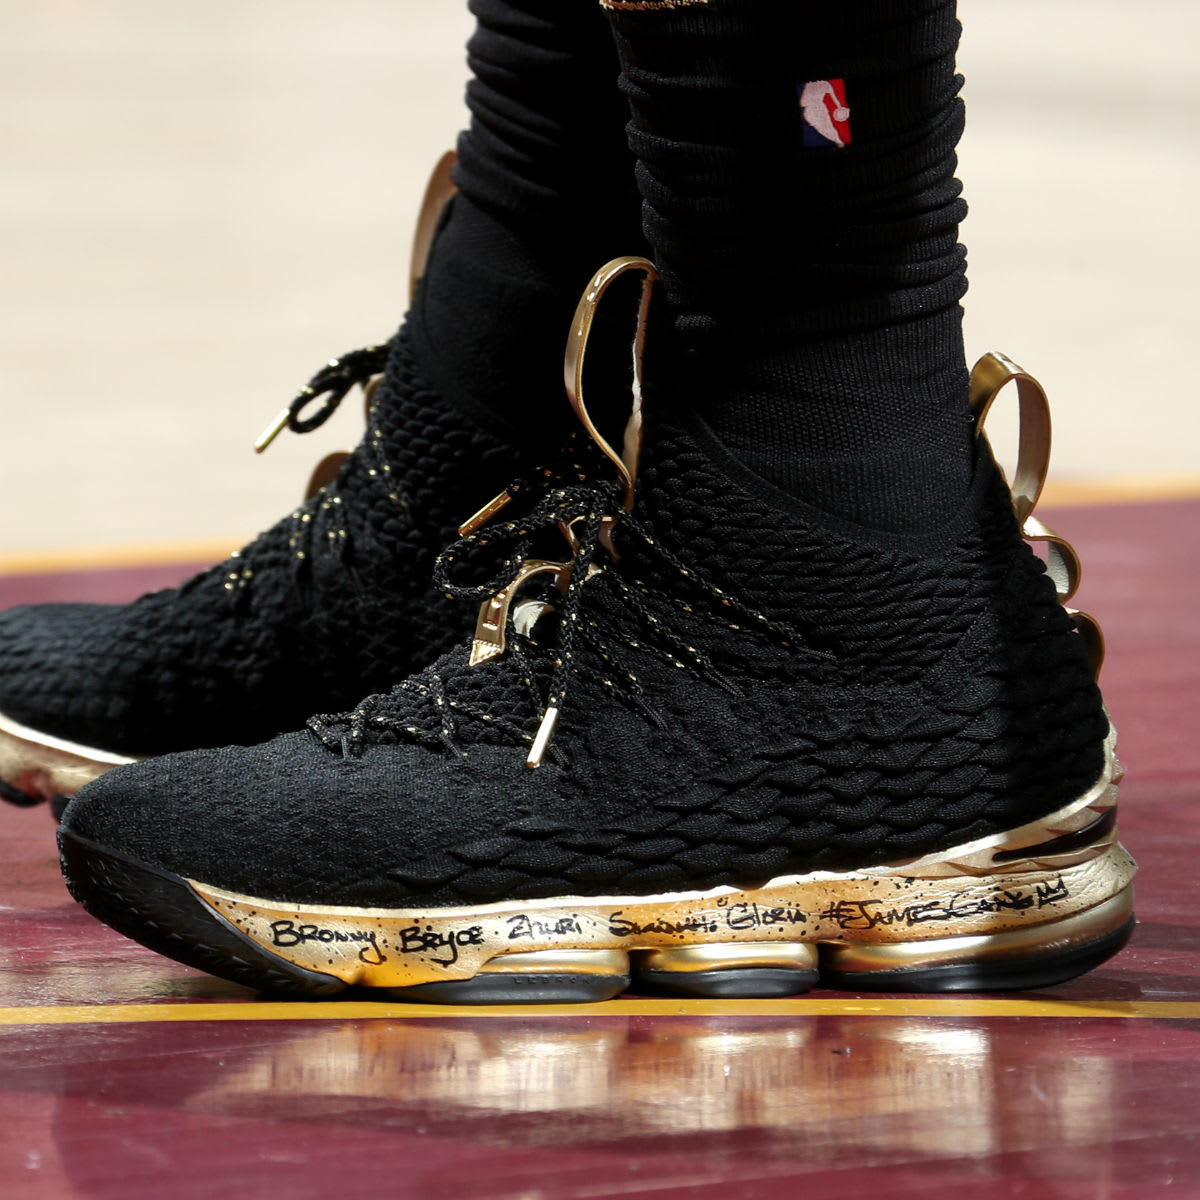 lebrons 15 black and gold